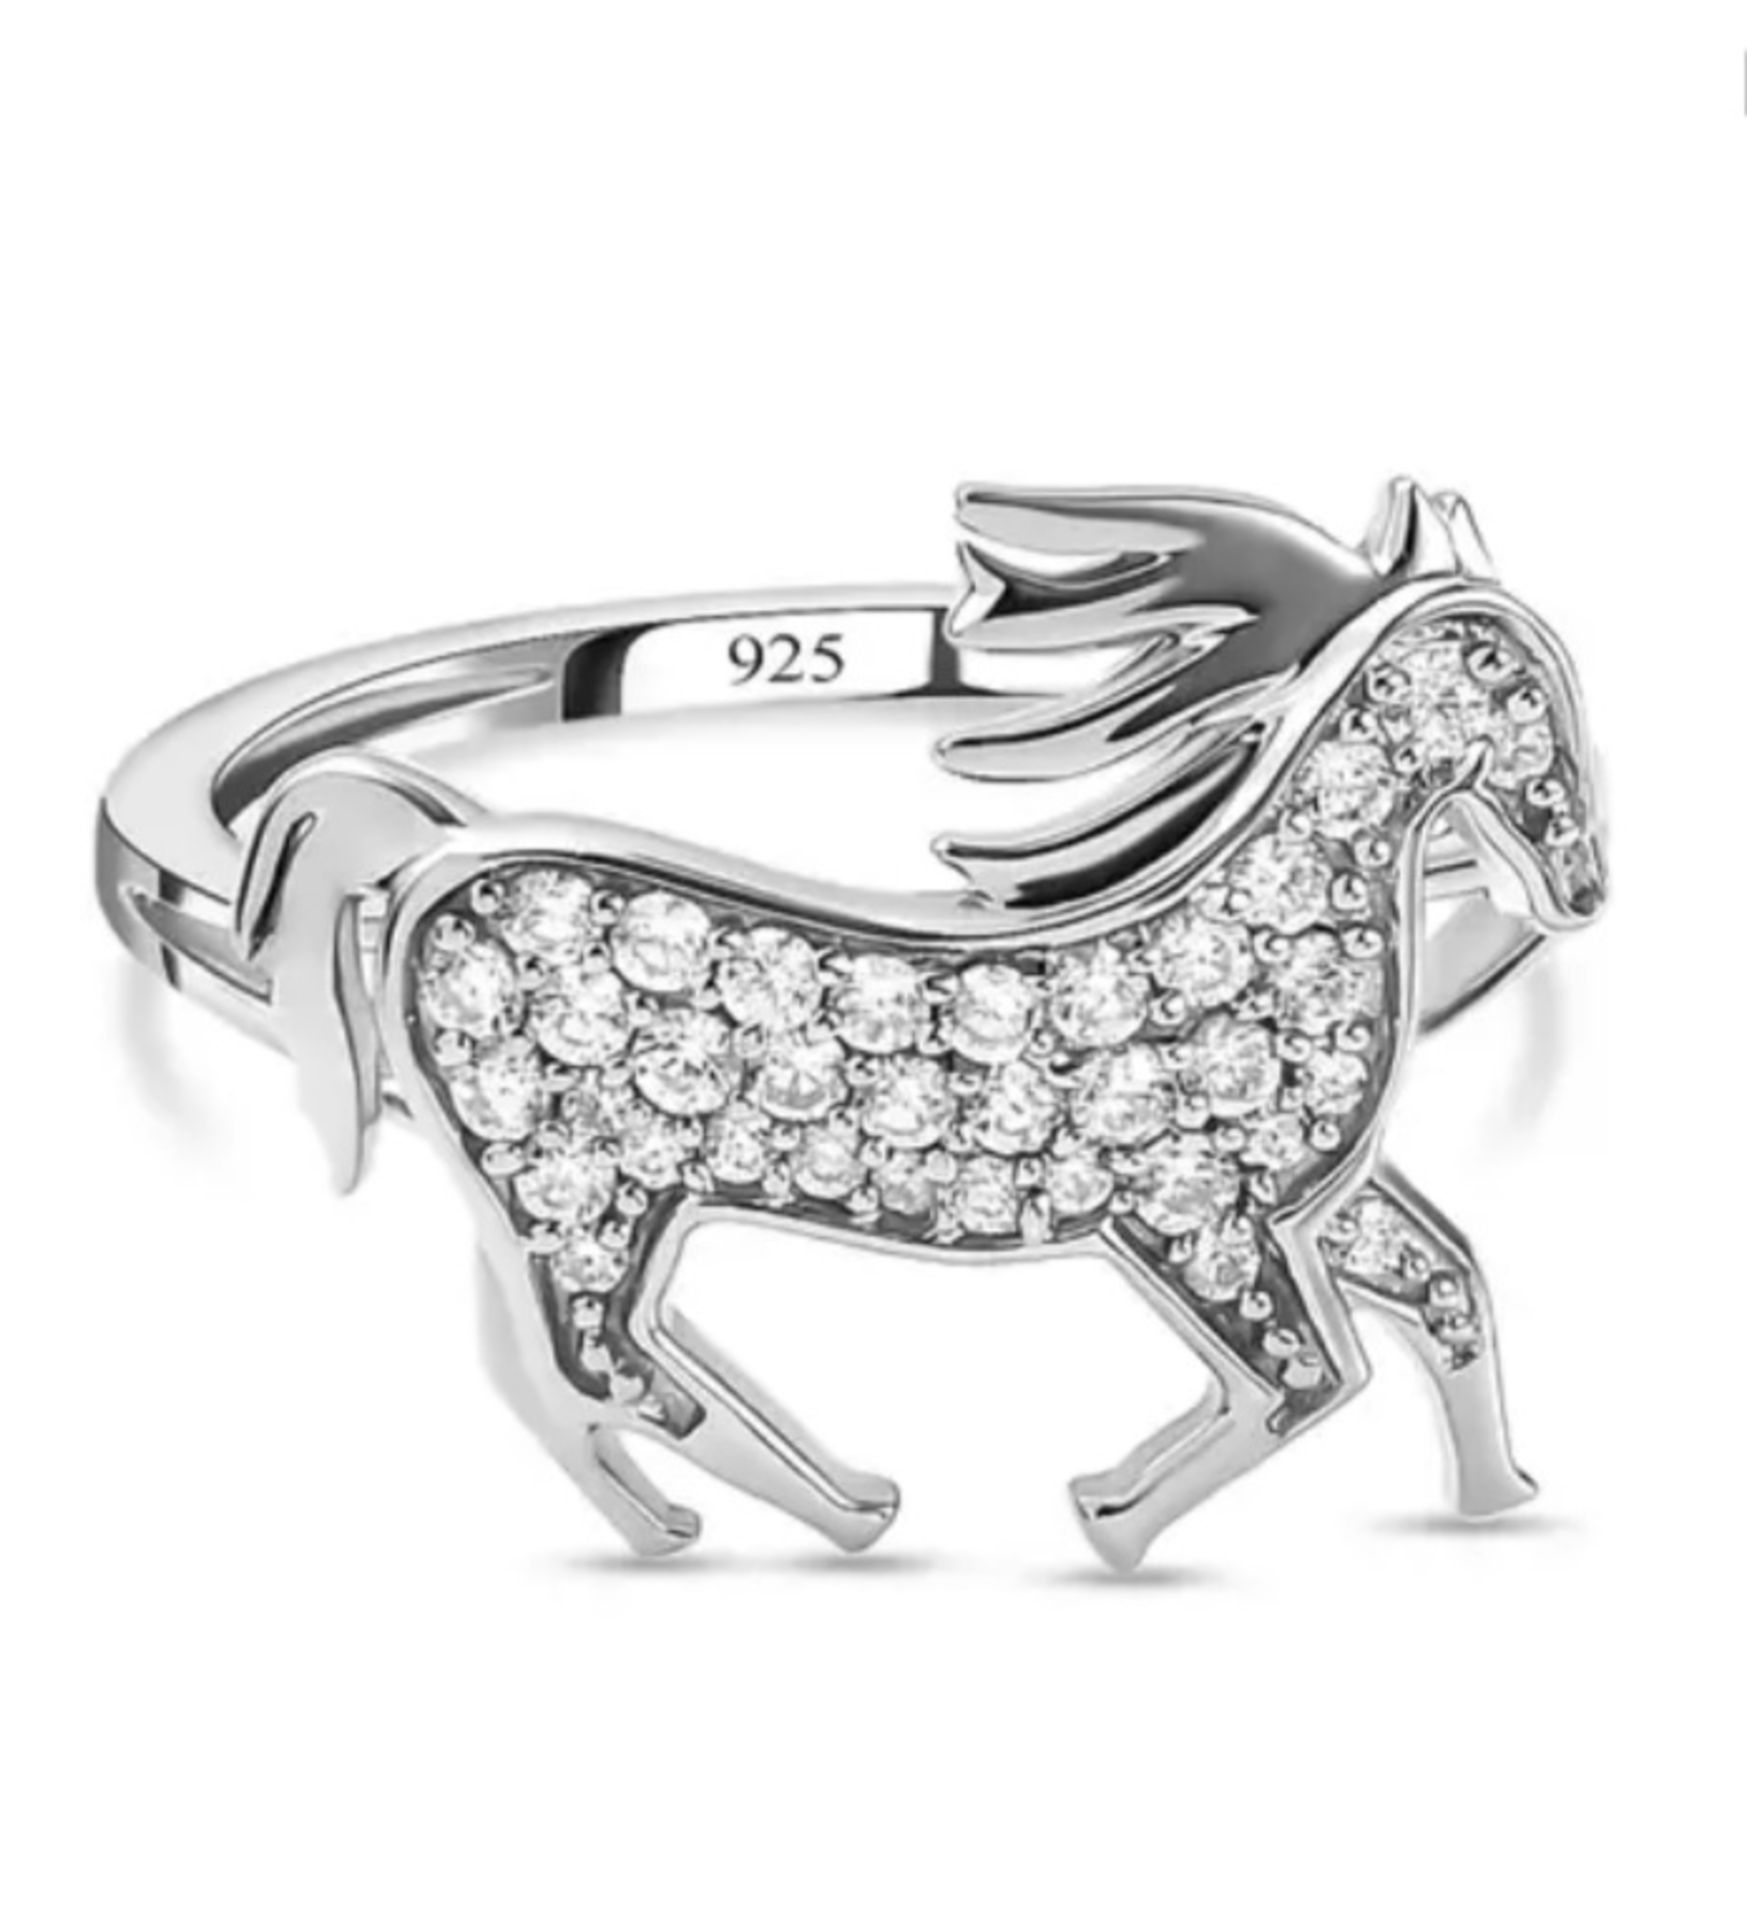 New! Elanza Simulated CZ Unicorn Ring In Platinum Overlay Sterling Silver - Image 2 of 4